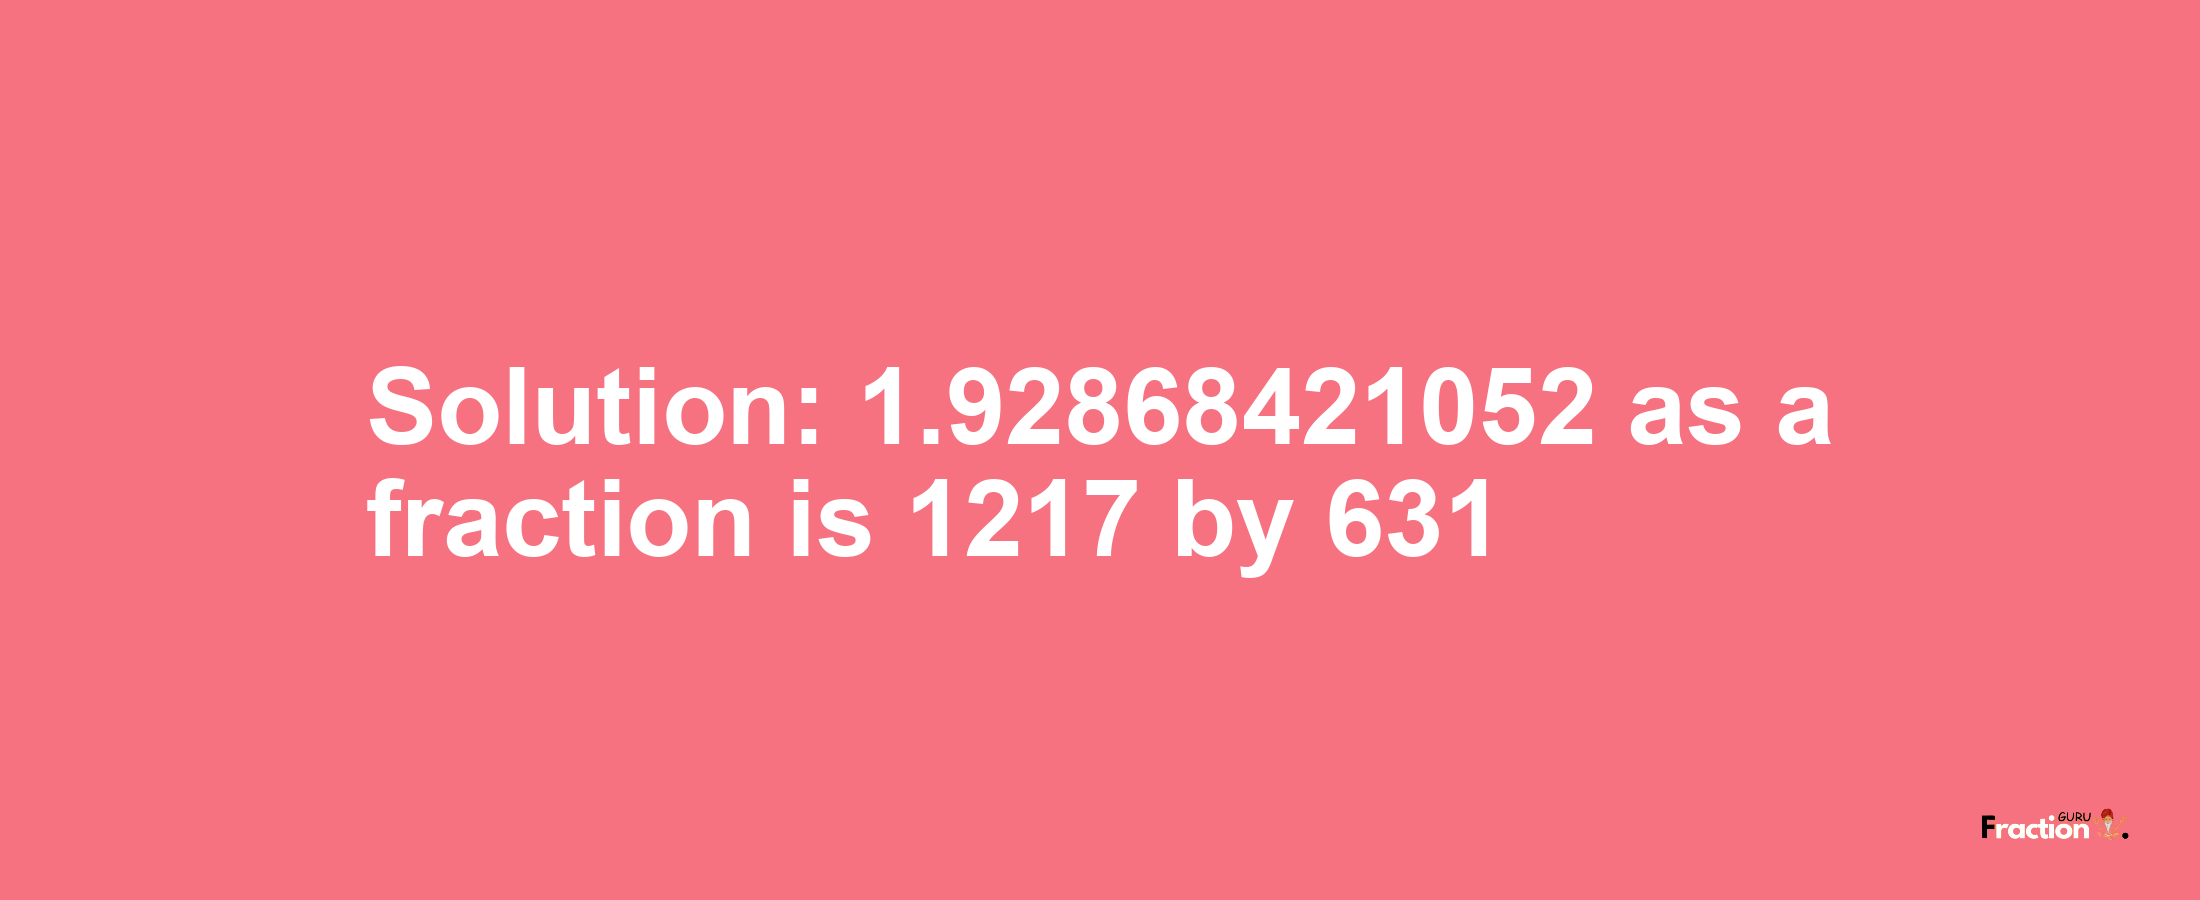 Solution:1.92868421052 as a fraction is 1217/631